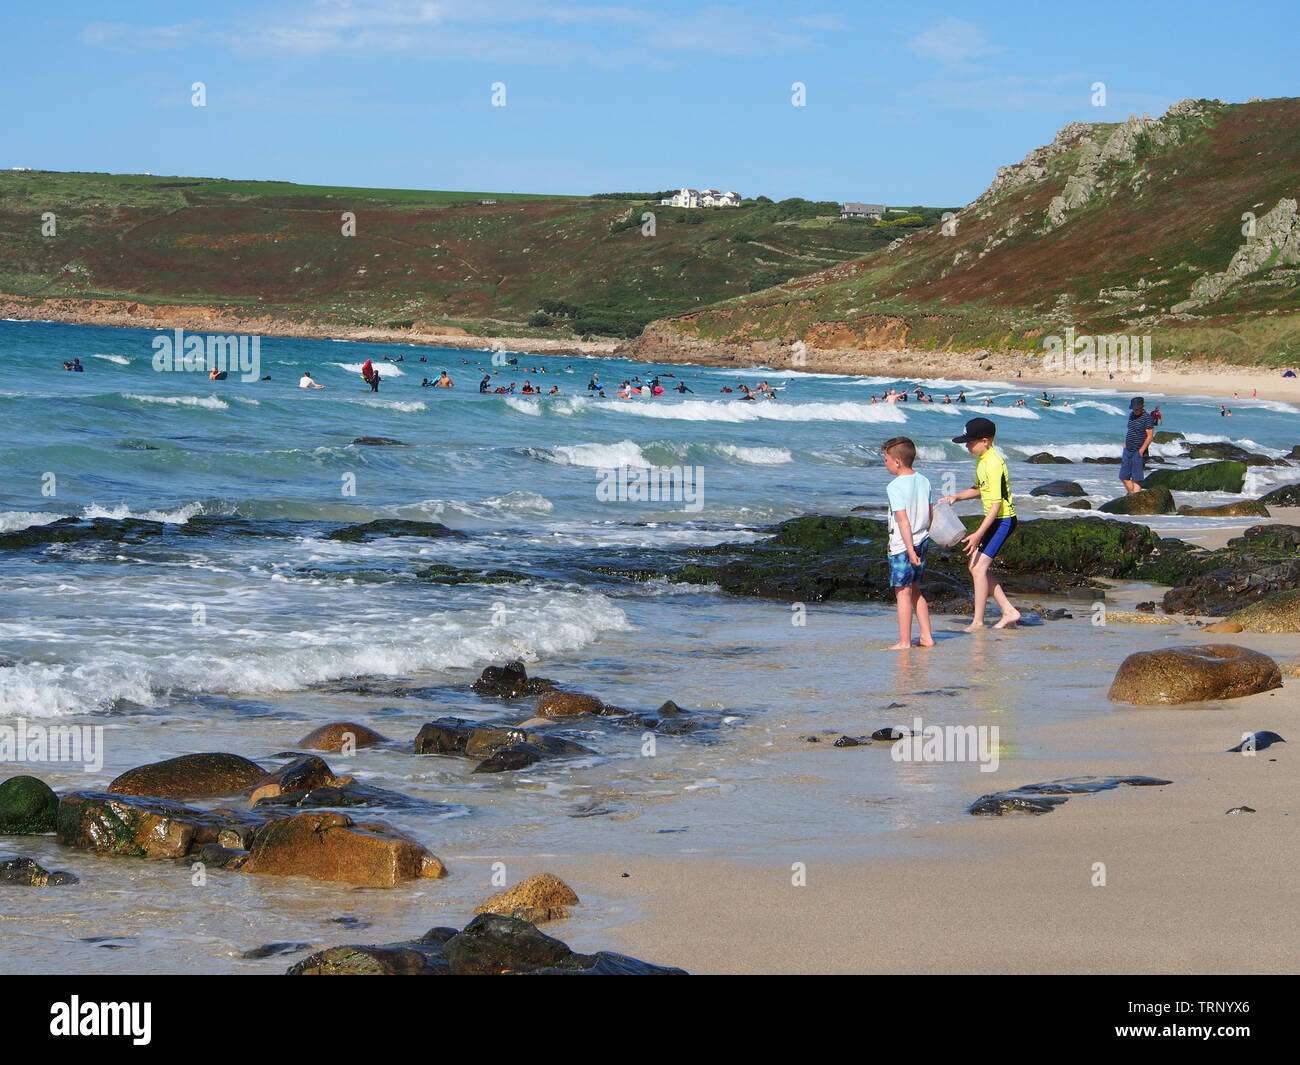 People enjoying a sunny summers day on the beach in Sennen Cove, Cornwall, England, UK showing the sandy beach and blue sea under a blue sky. Stock Photo